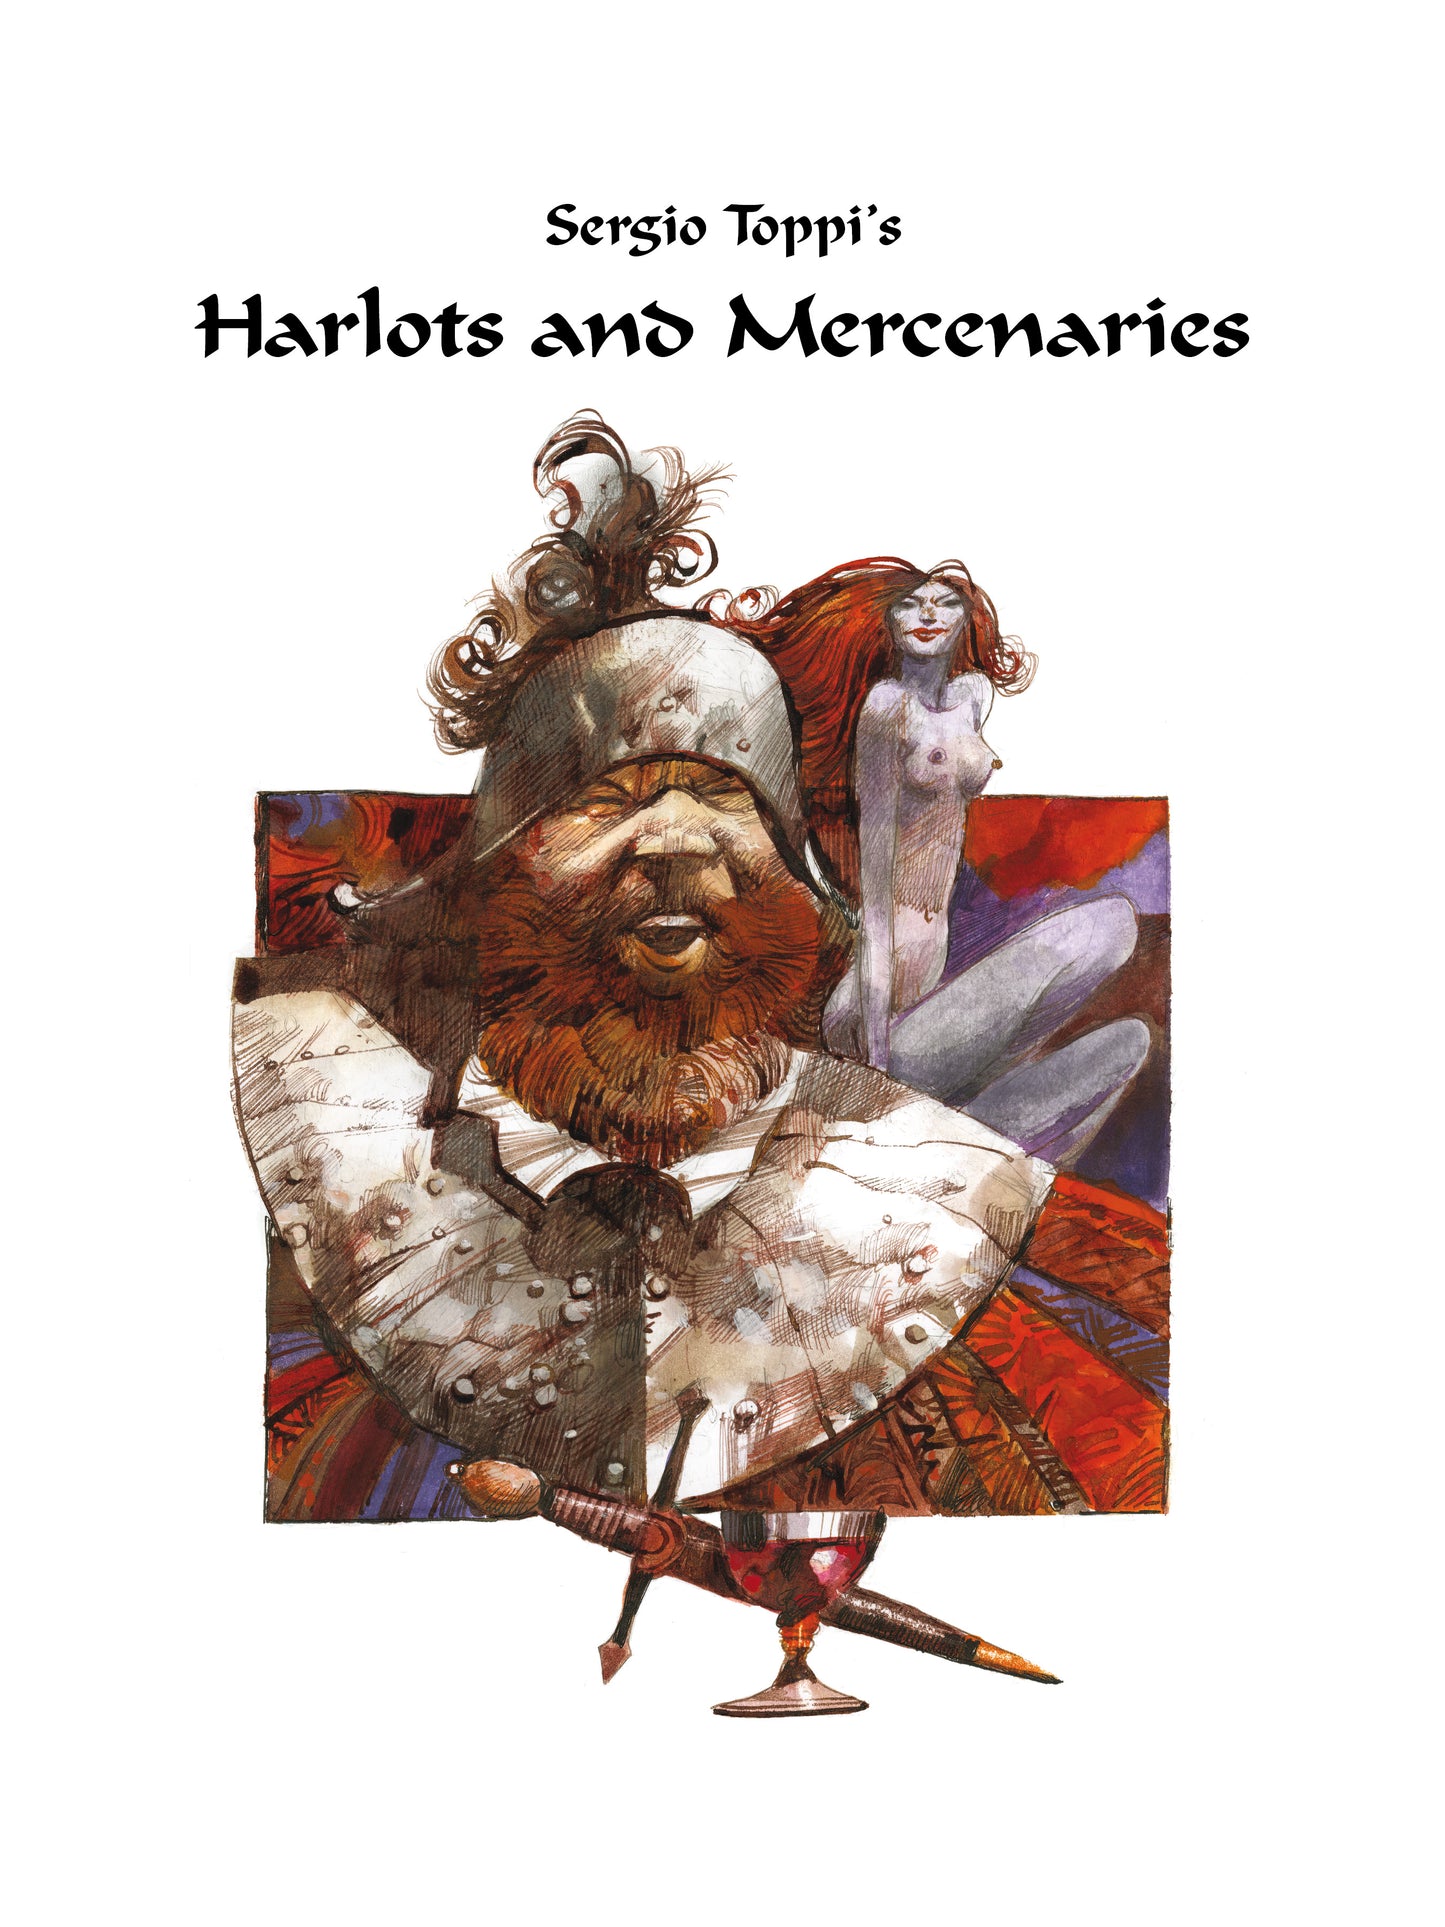 THE TOPPI GALLERY: HARLOTS AND MERCENARIES, by Sergio Toppi